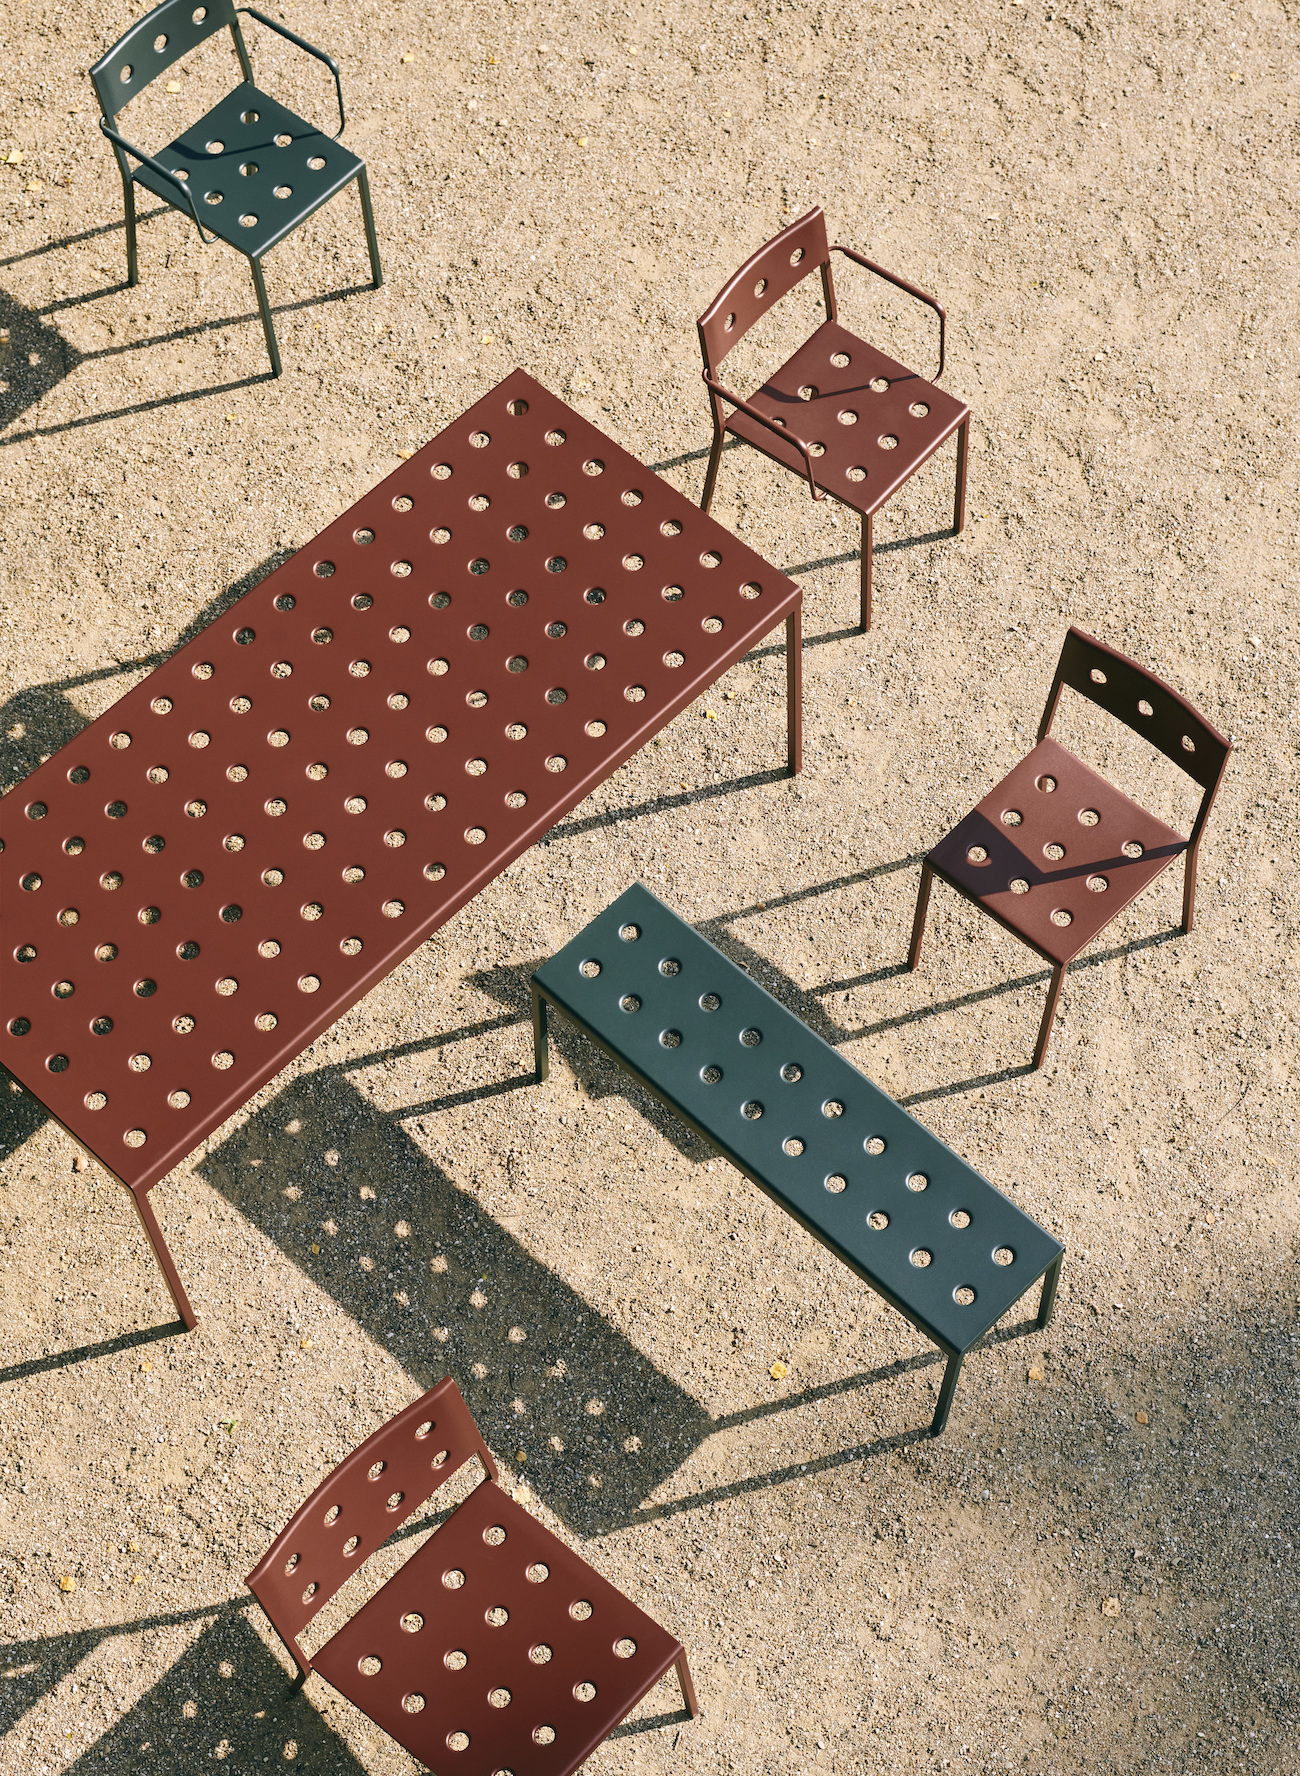 Perforated metal furniture is one of 2022's summer interior design trends